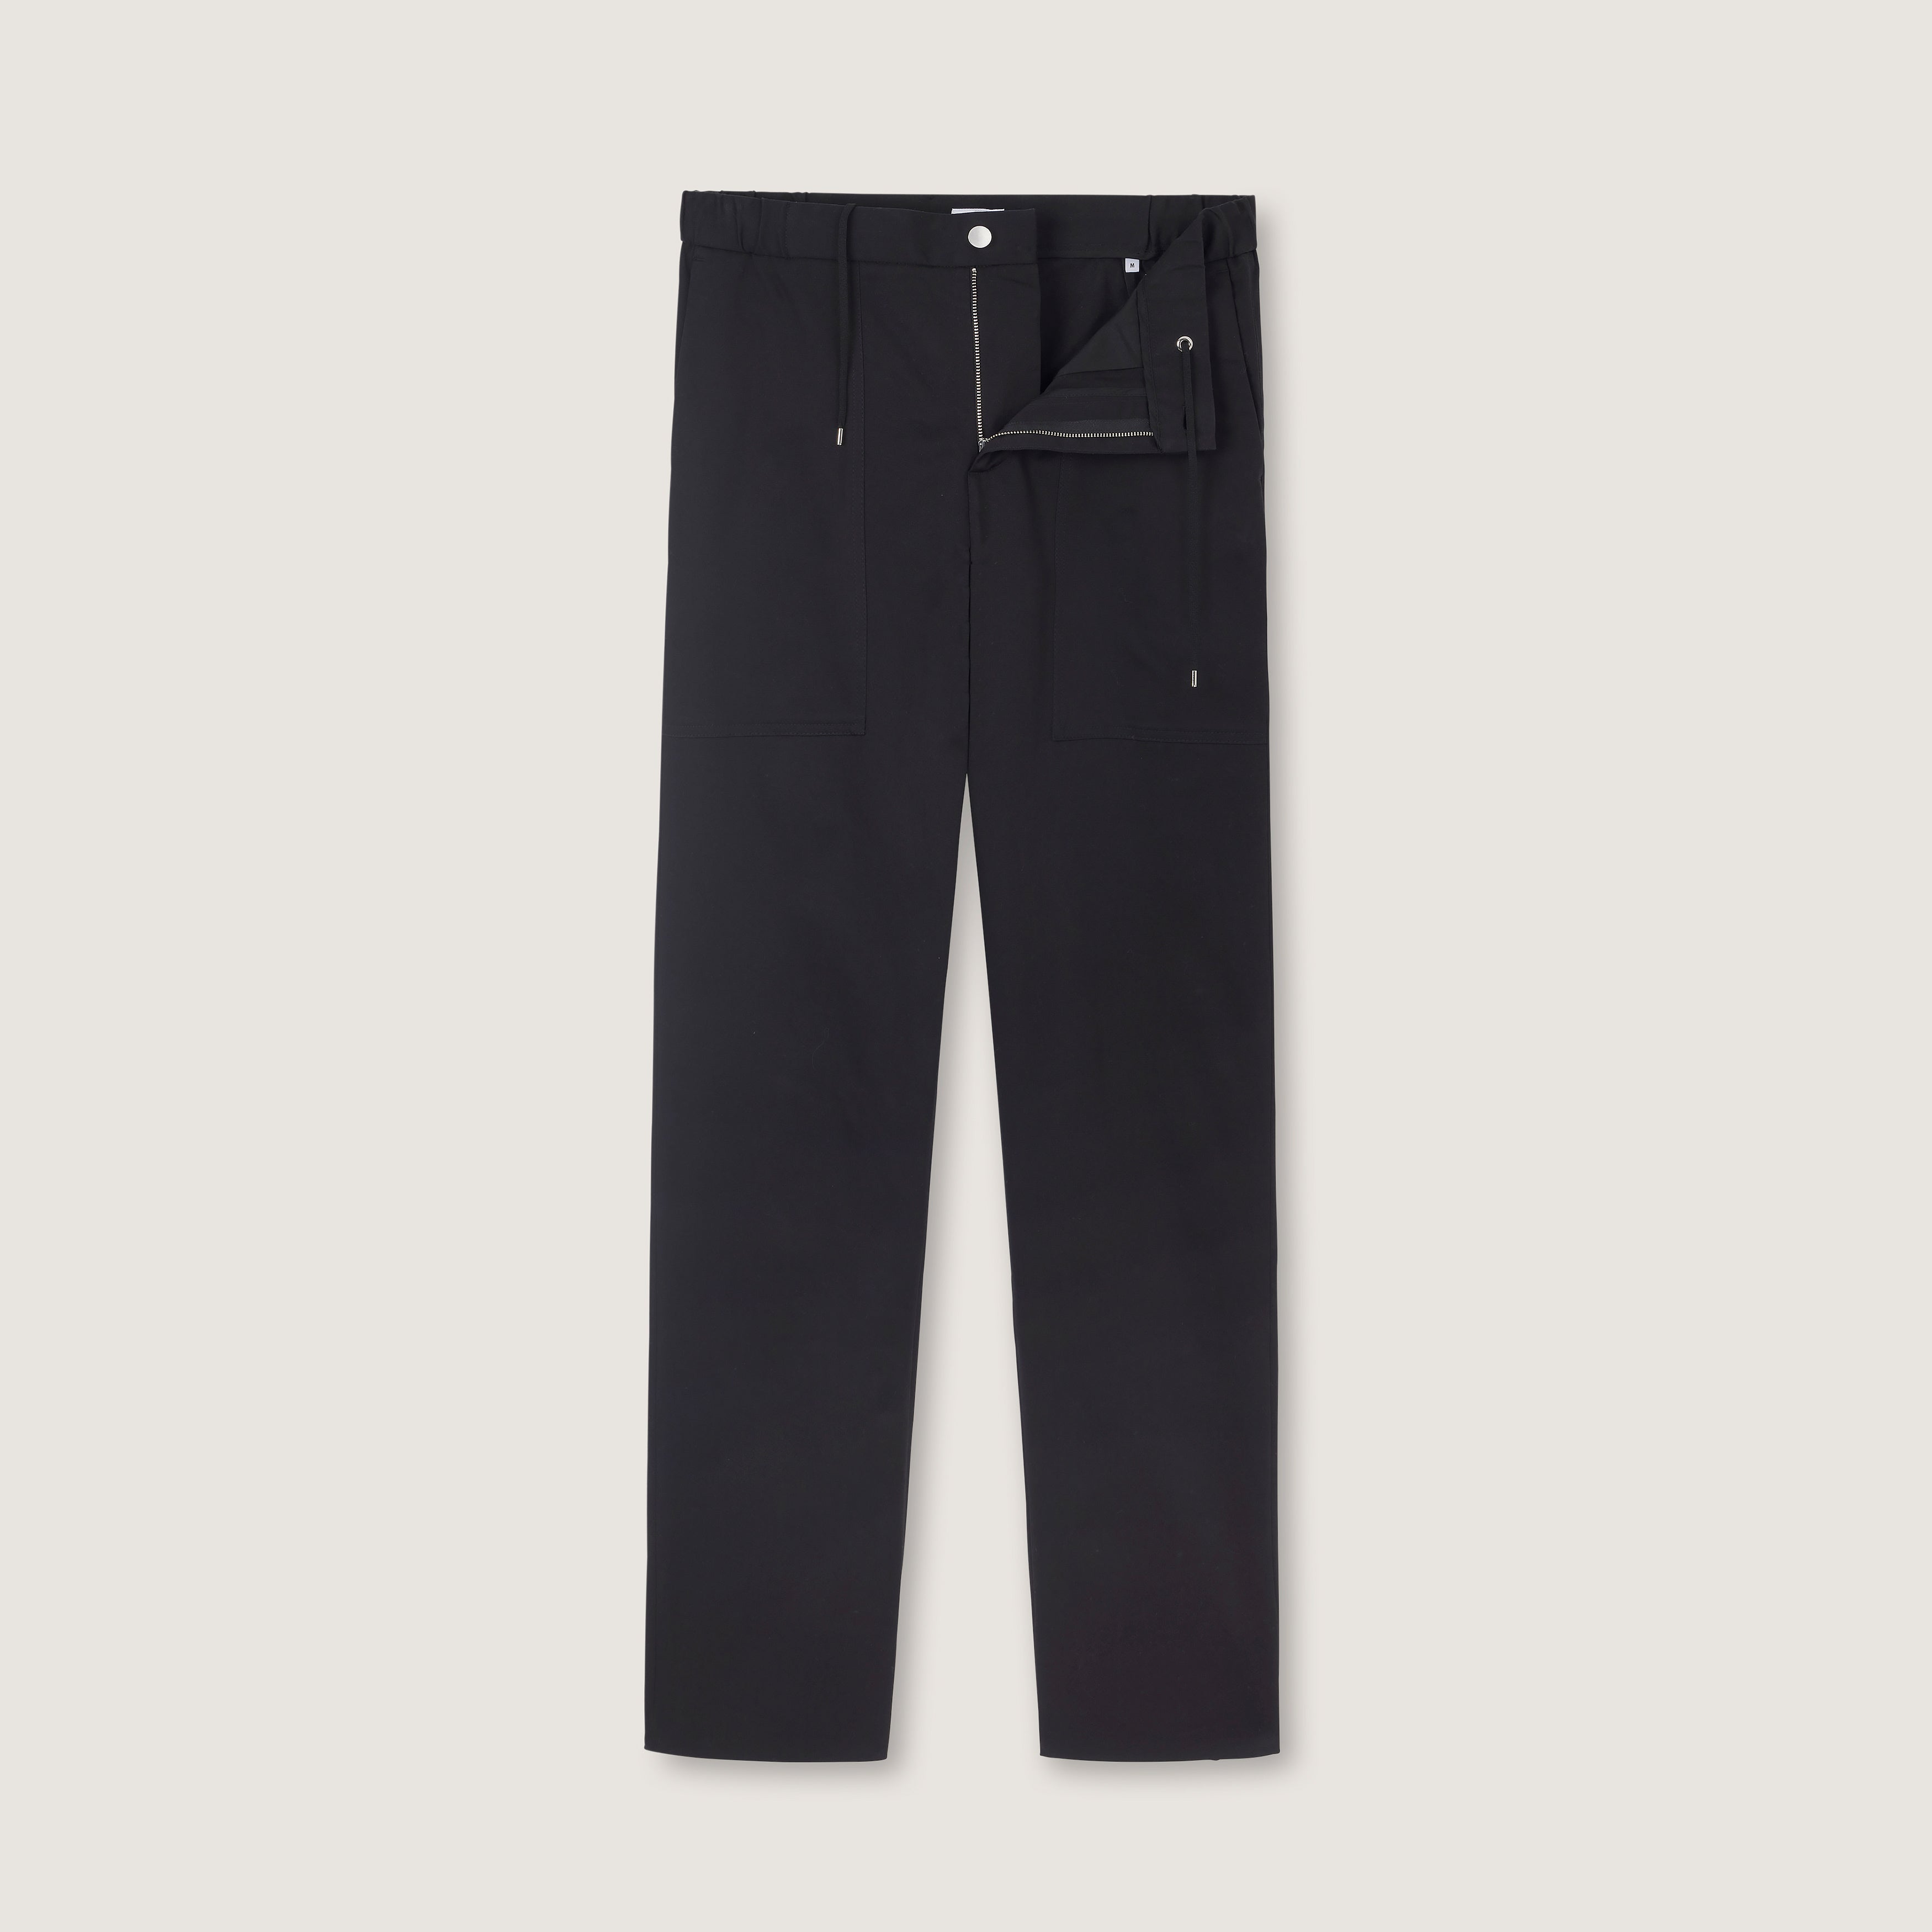 TOG WebsiteImagery ProductPages LS24Trouser5